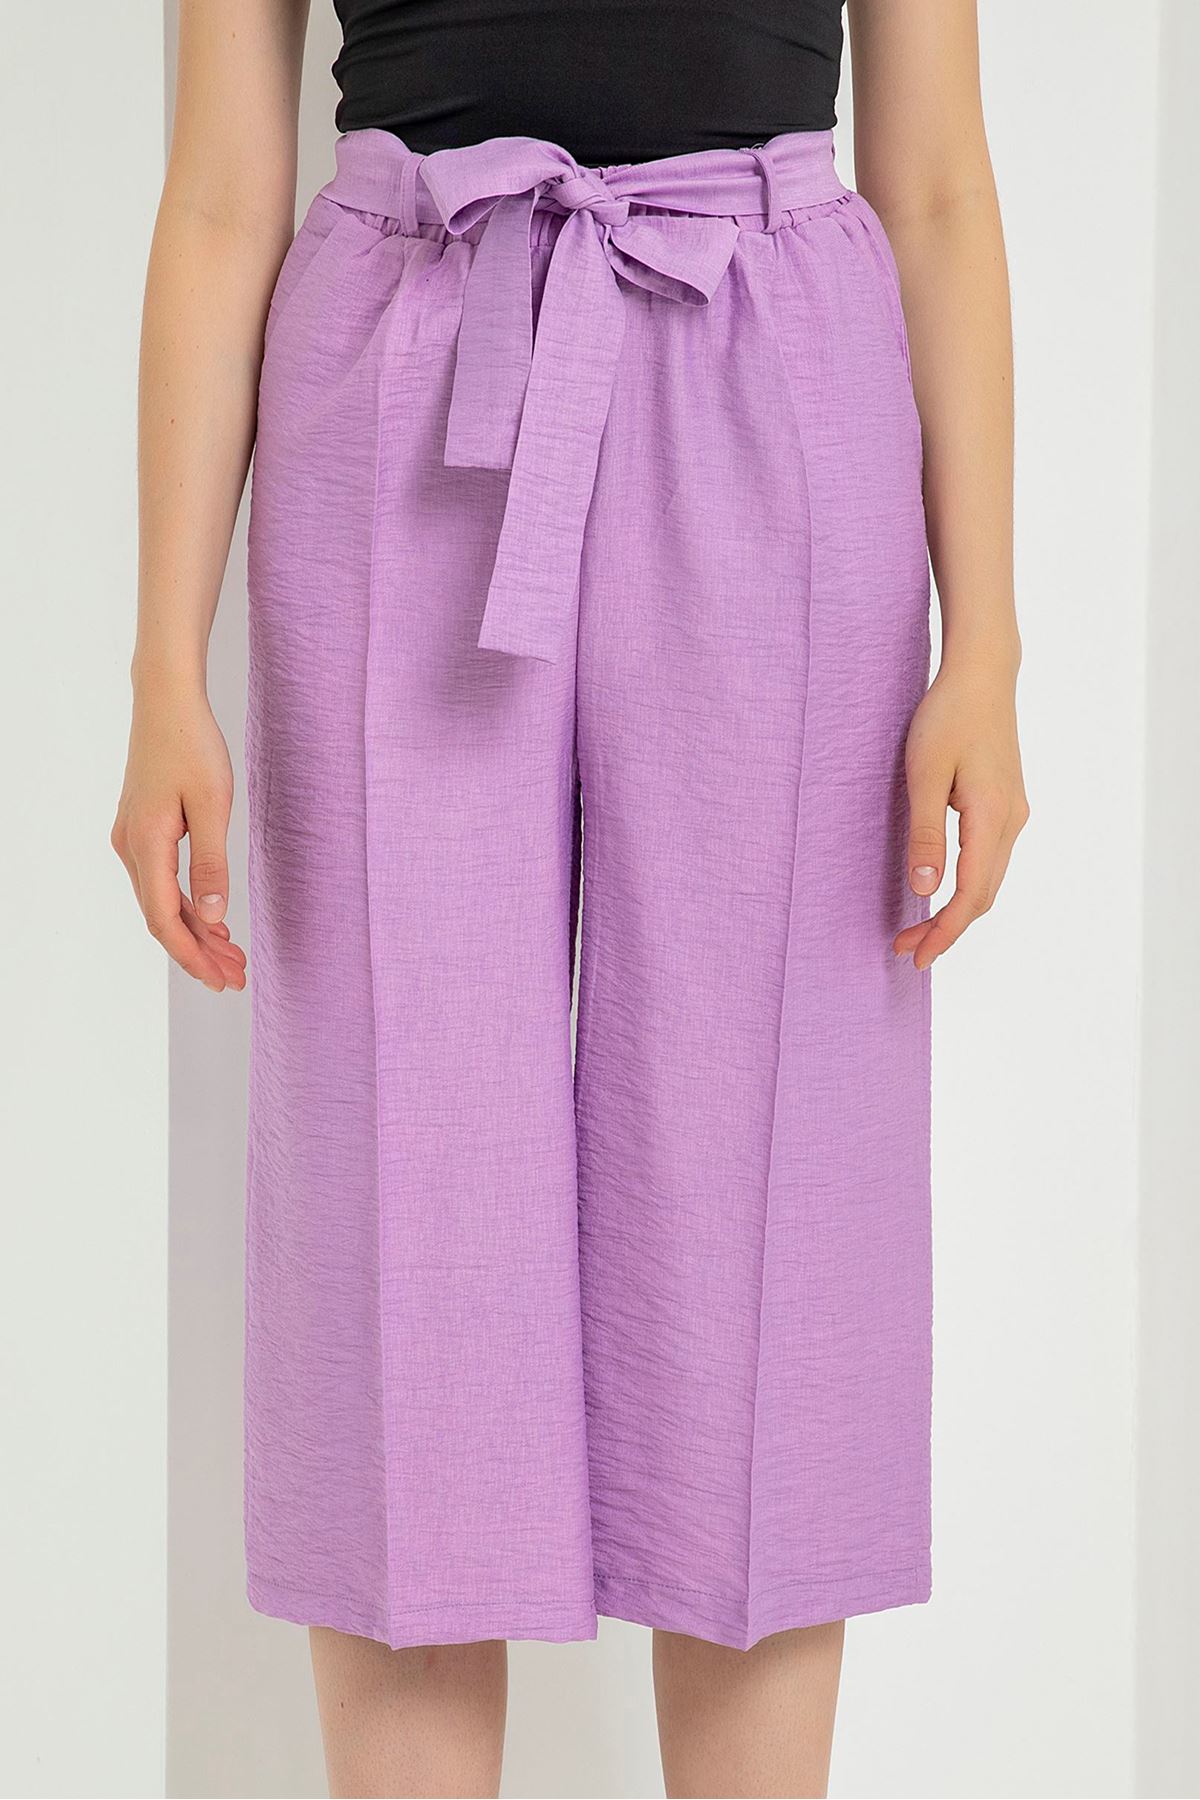 Linen Fabric 3/4 Short Comfy Fit Belted Women'S Trouser - Lilac